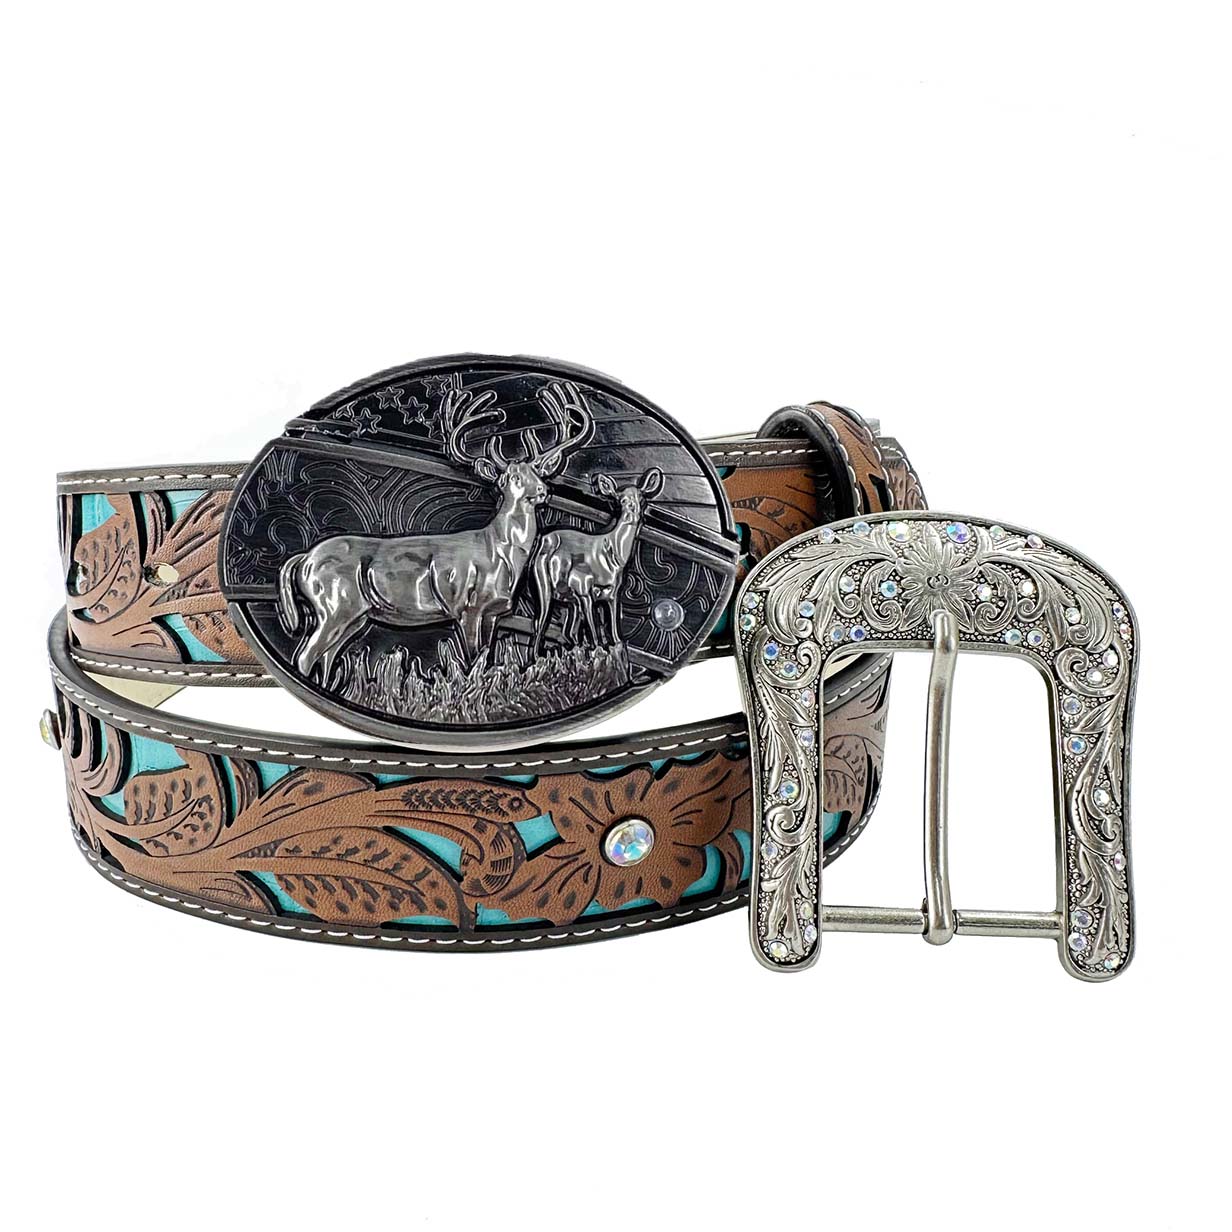 Western Turquoise Belts - Buckle with Block